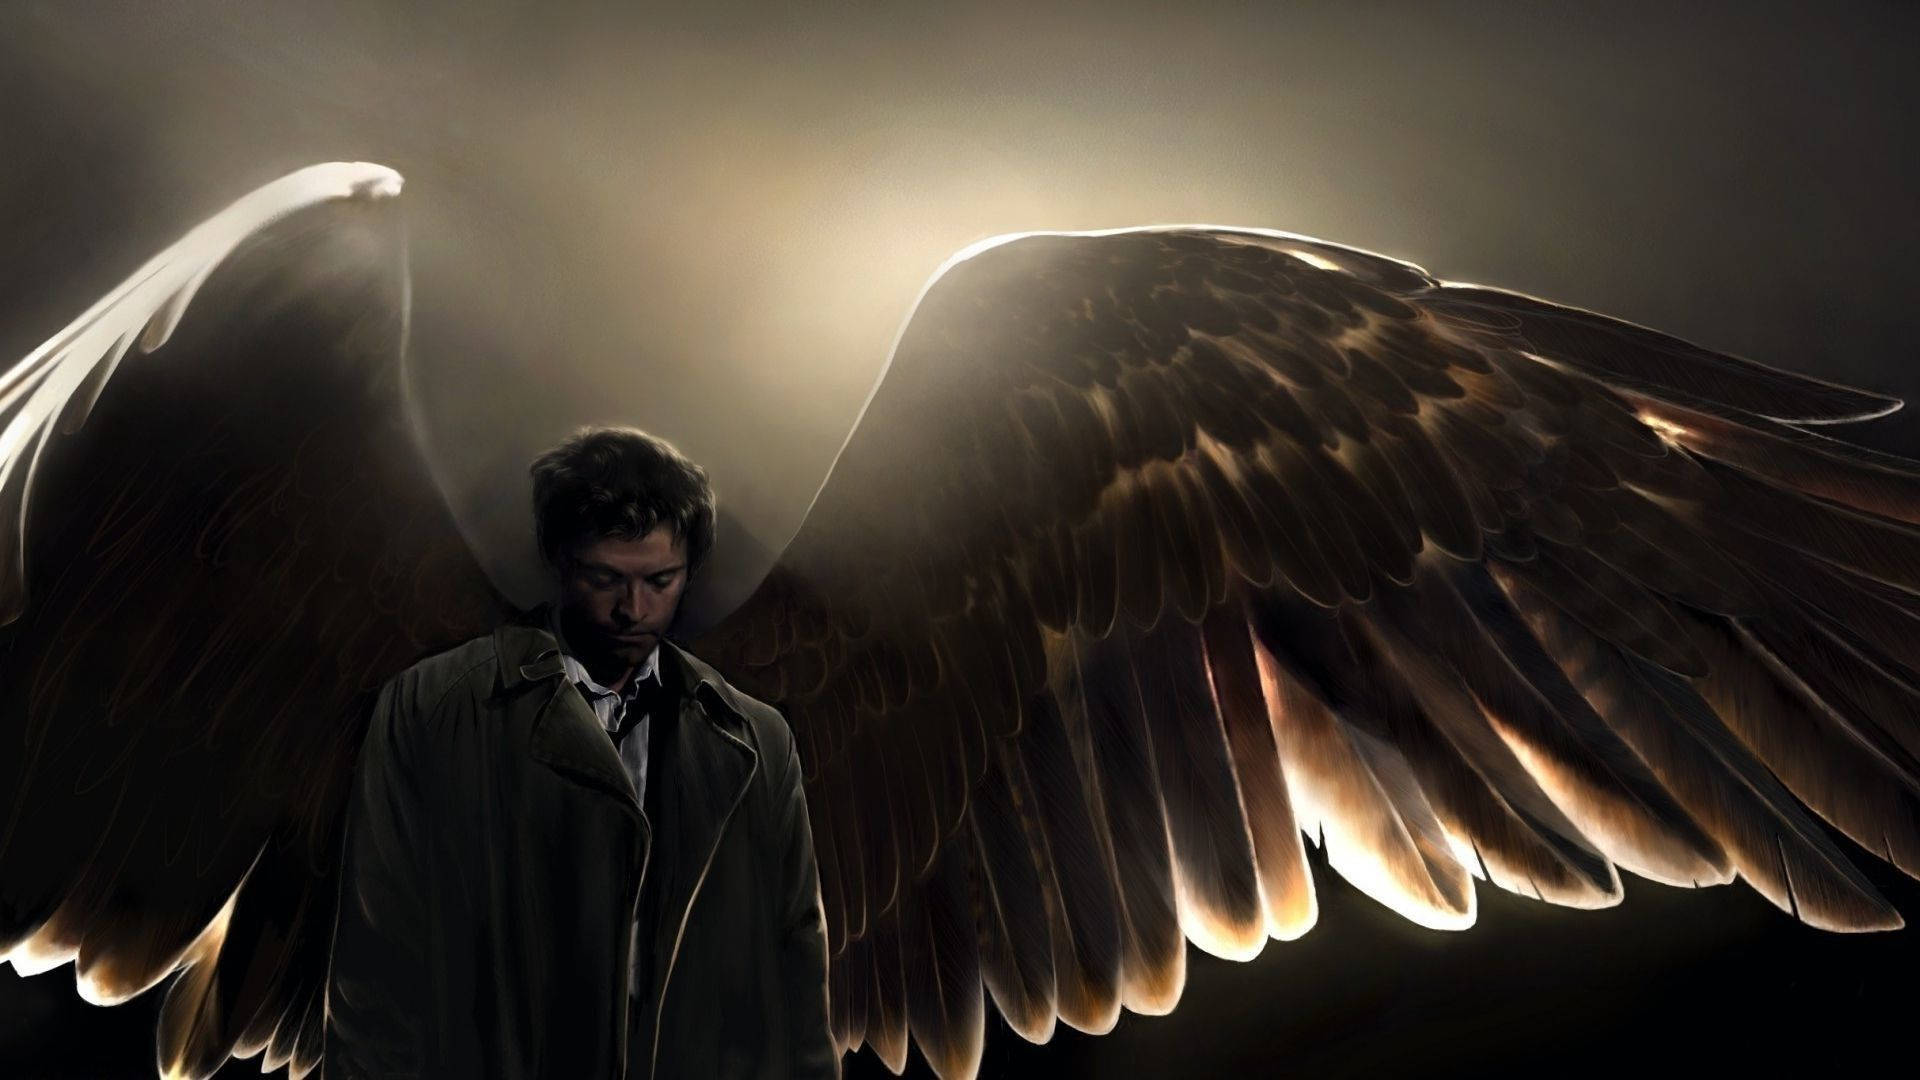 Feel the power of the Angel Castiel from Supernatural! Wallpaper